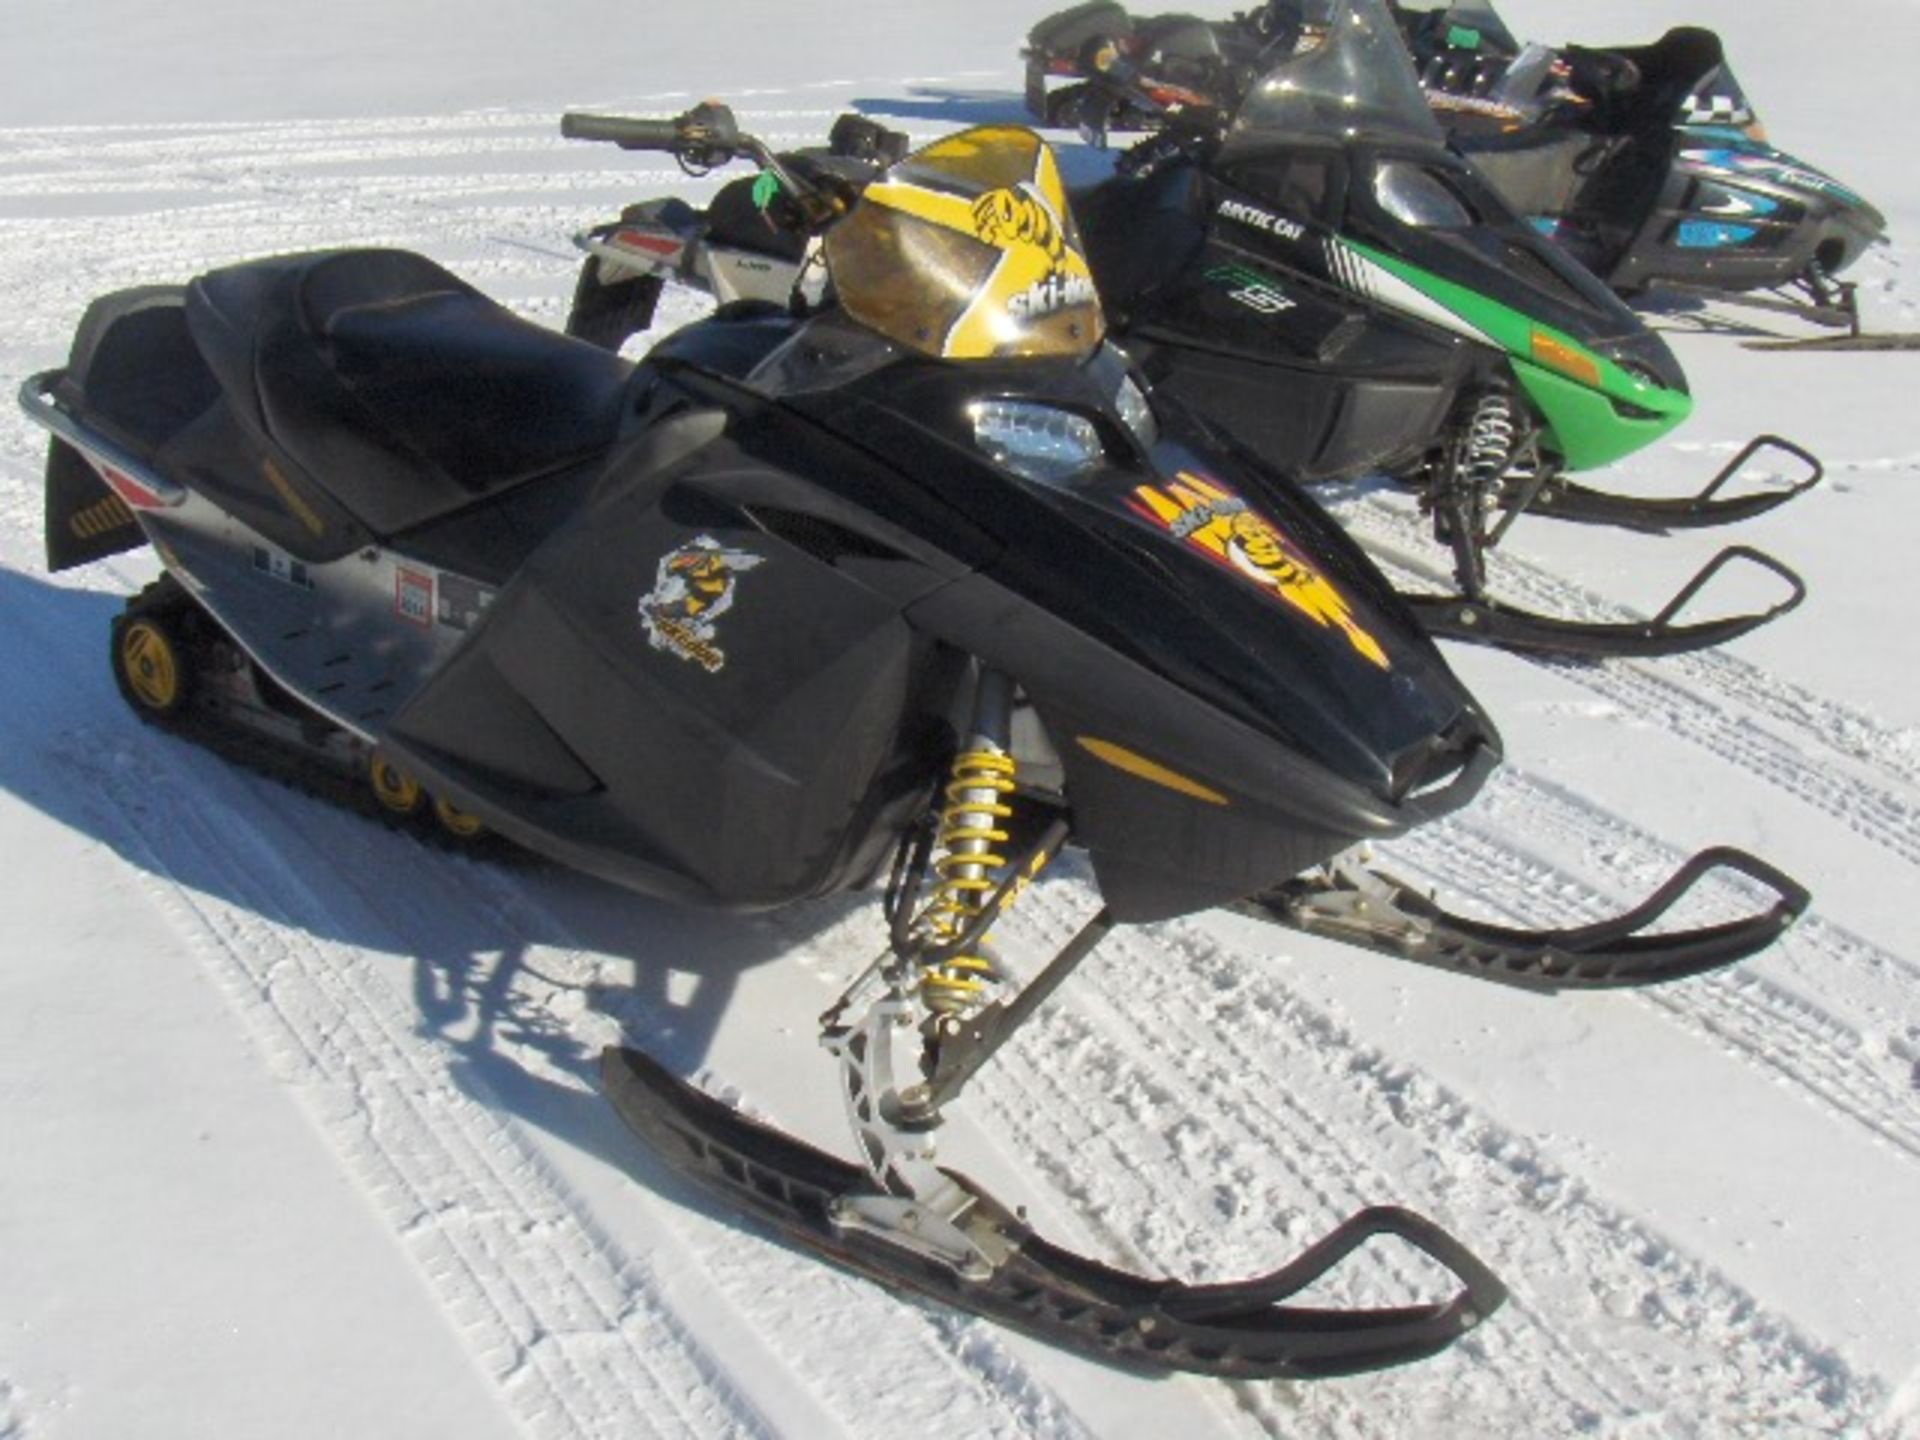 2004 SKI DOO 600 SDI MXZ  2BPS287404V000481 snowmobile, owner started at time of auction check in, - Image 2 of 4